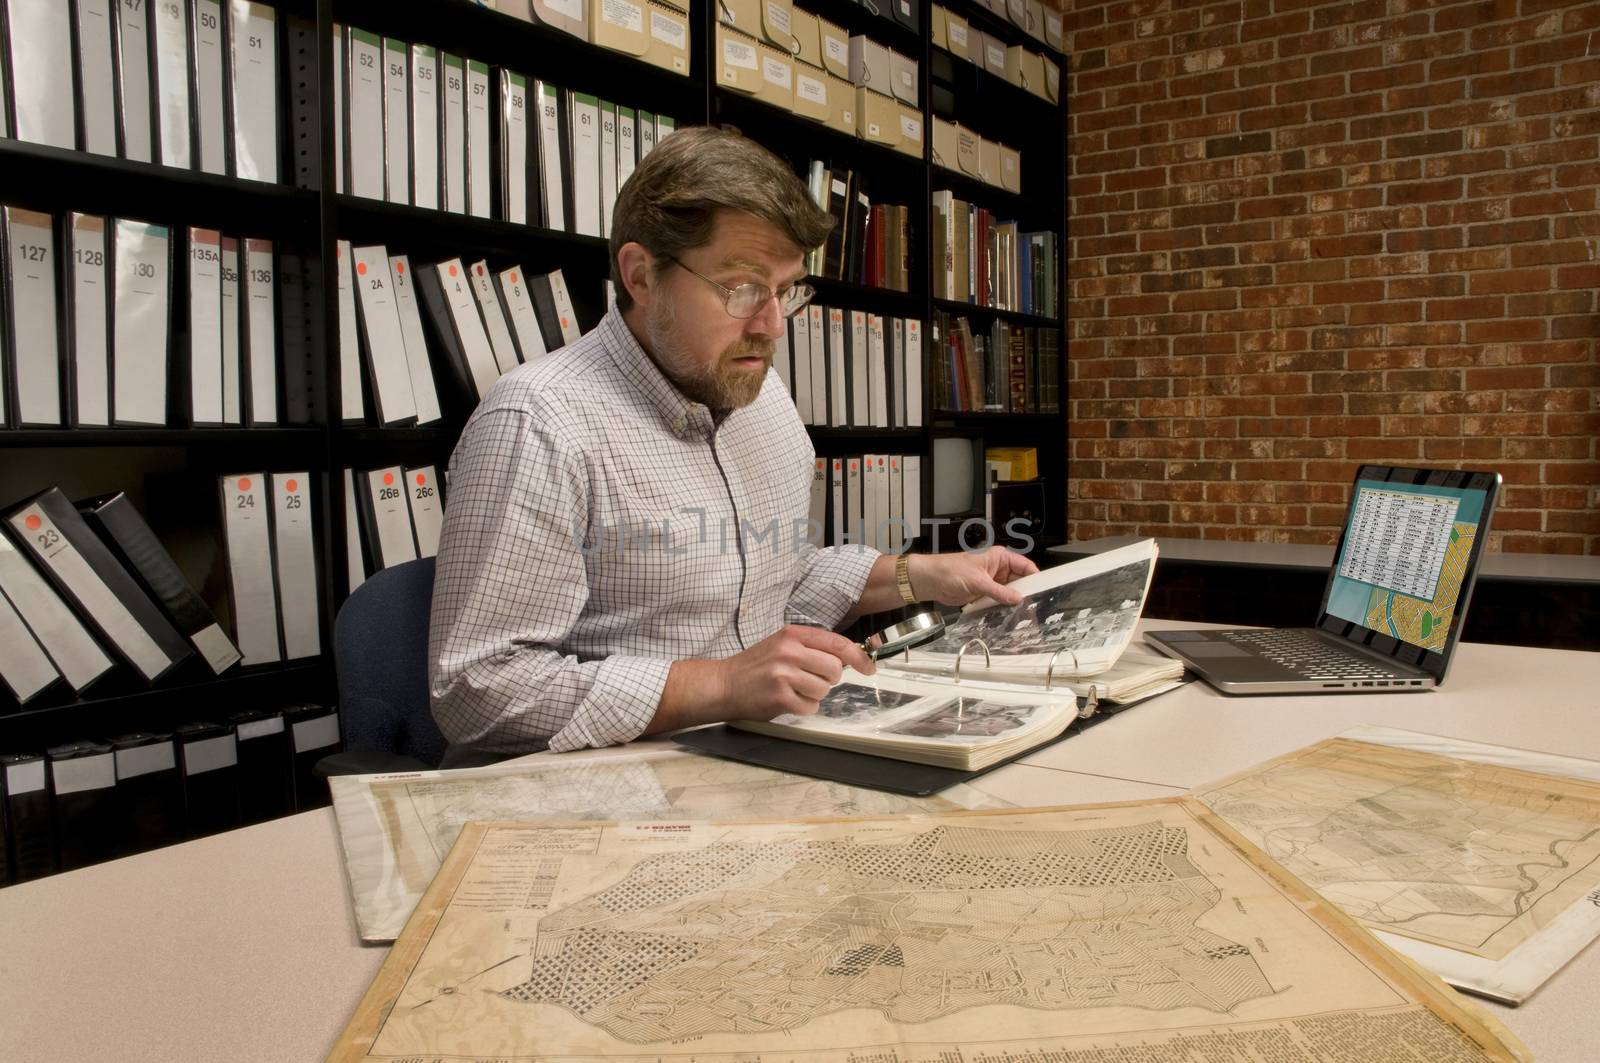 Researcher in archive, searching through maps and photographs. [Maps and photographs shown are public domain. Image on computer was created for this photograph. Model & Property Released.]